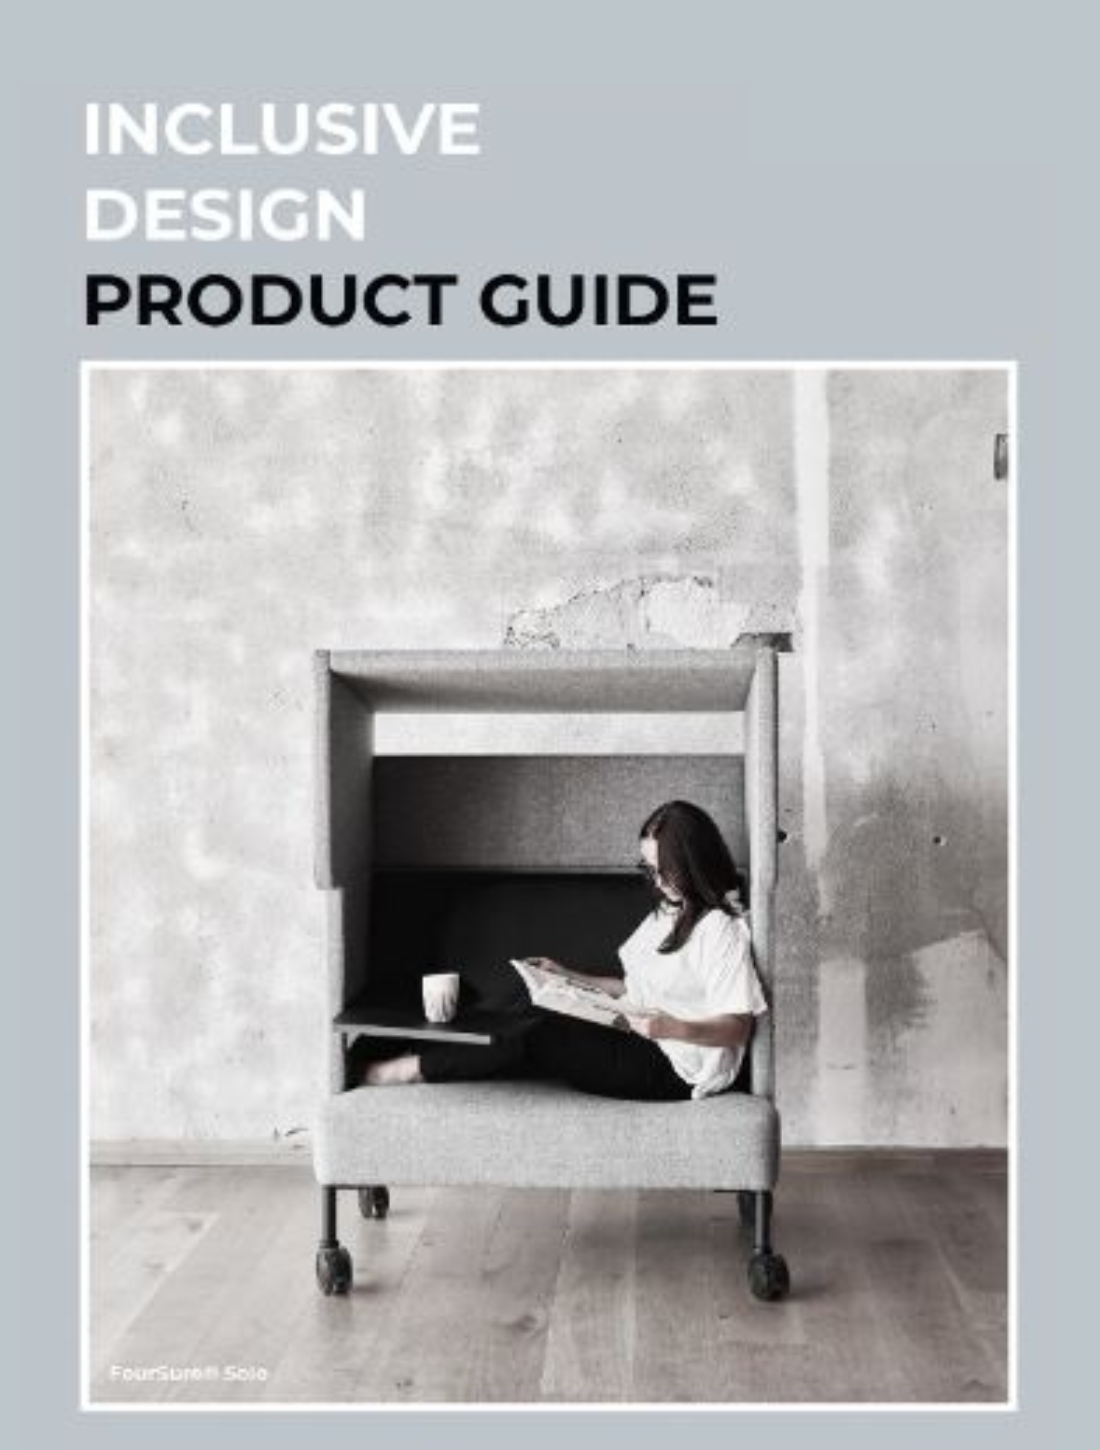 A woman seated at a work booth, featured on the front cover of an inclusive design guide.